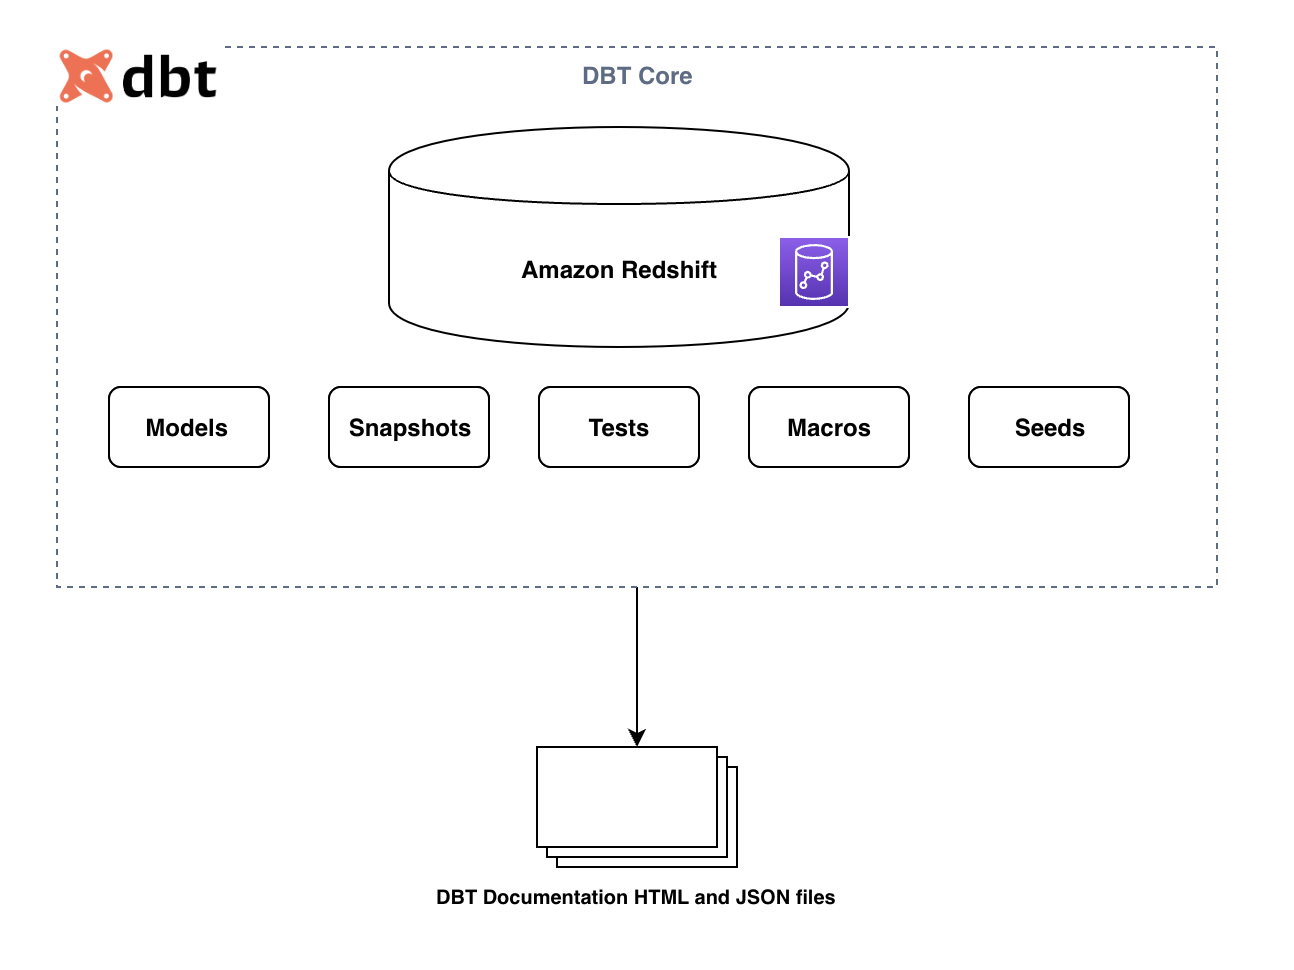 Implement data warehousing solution using dbt on Amazon Redshift | Amazon Web Services